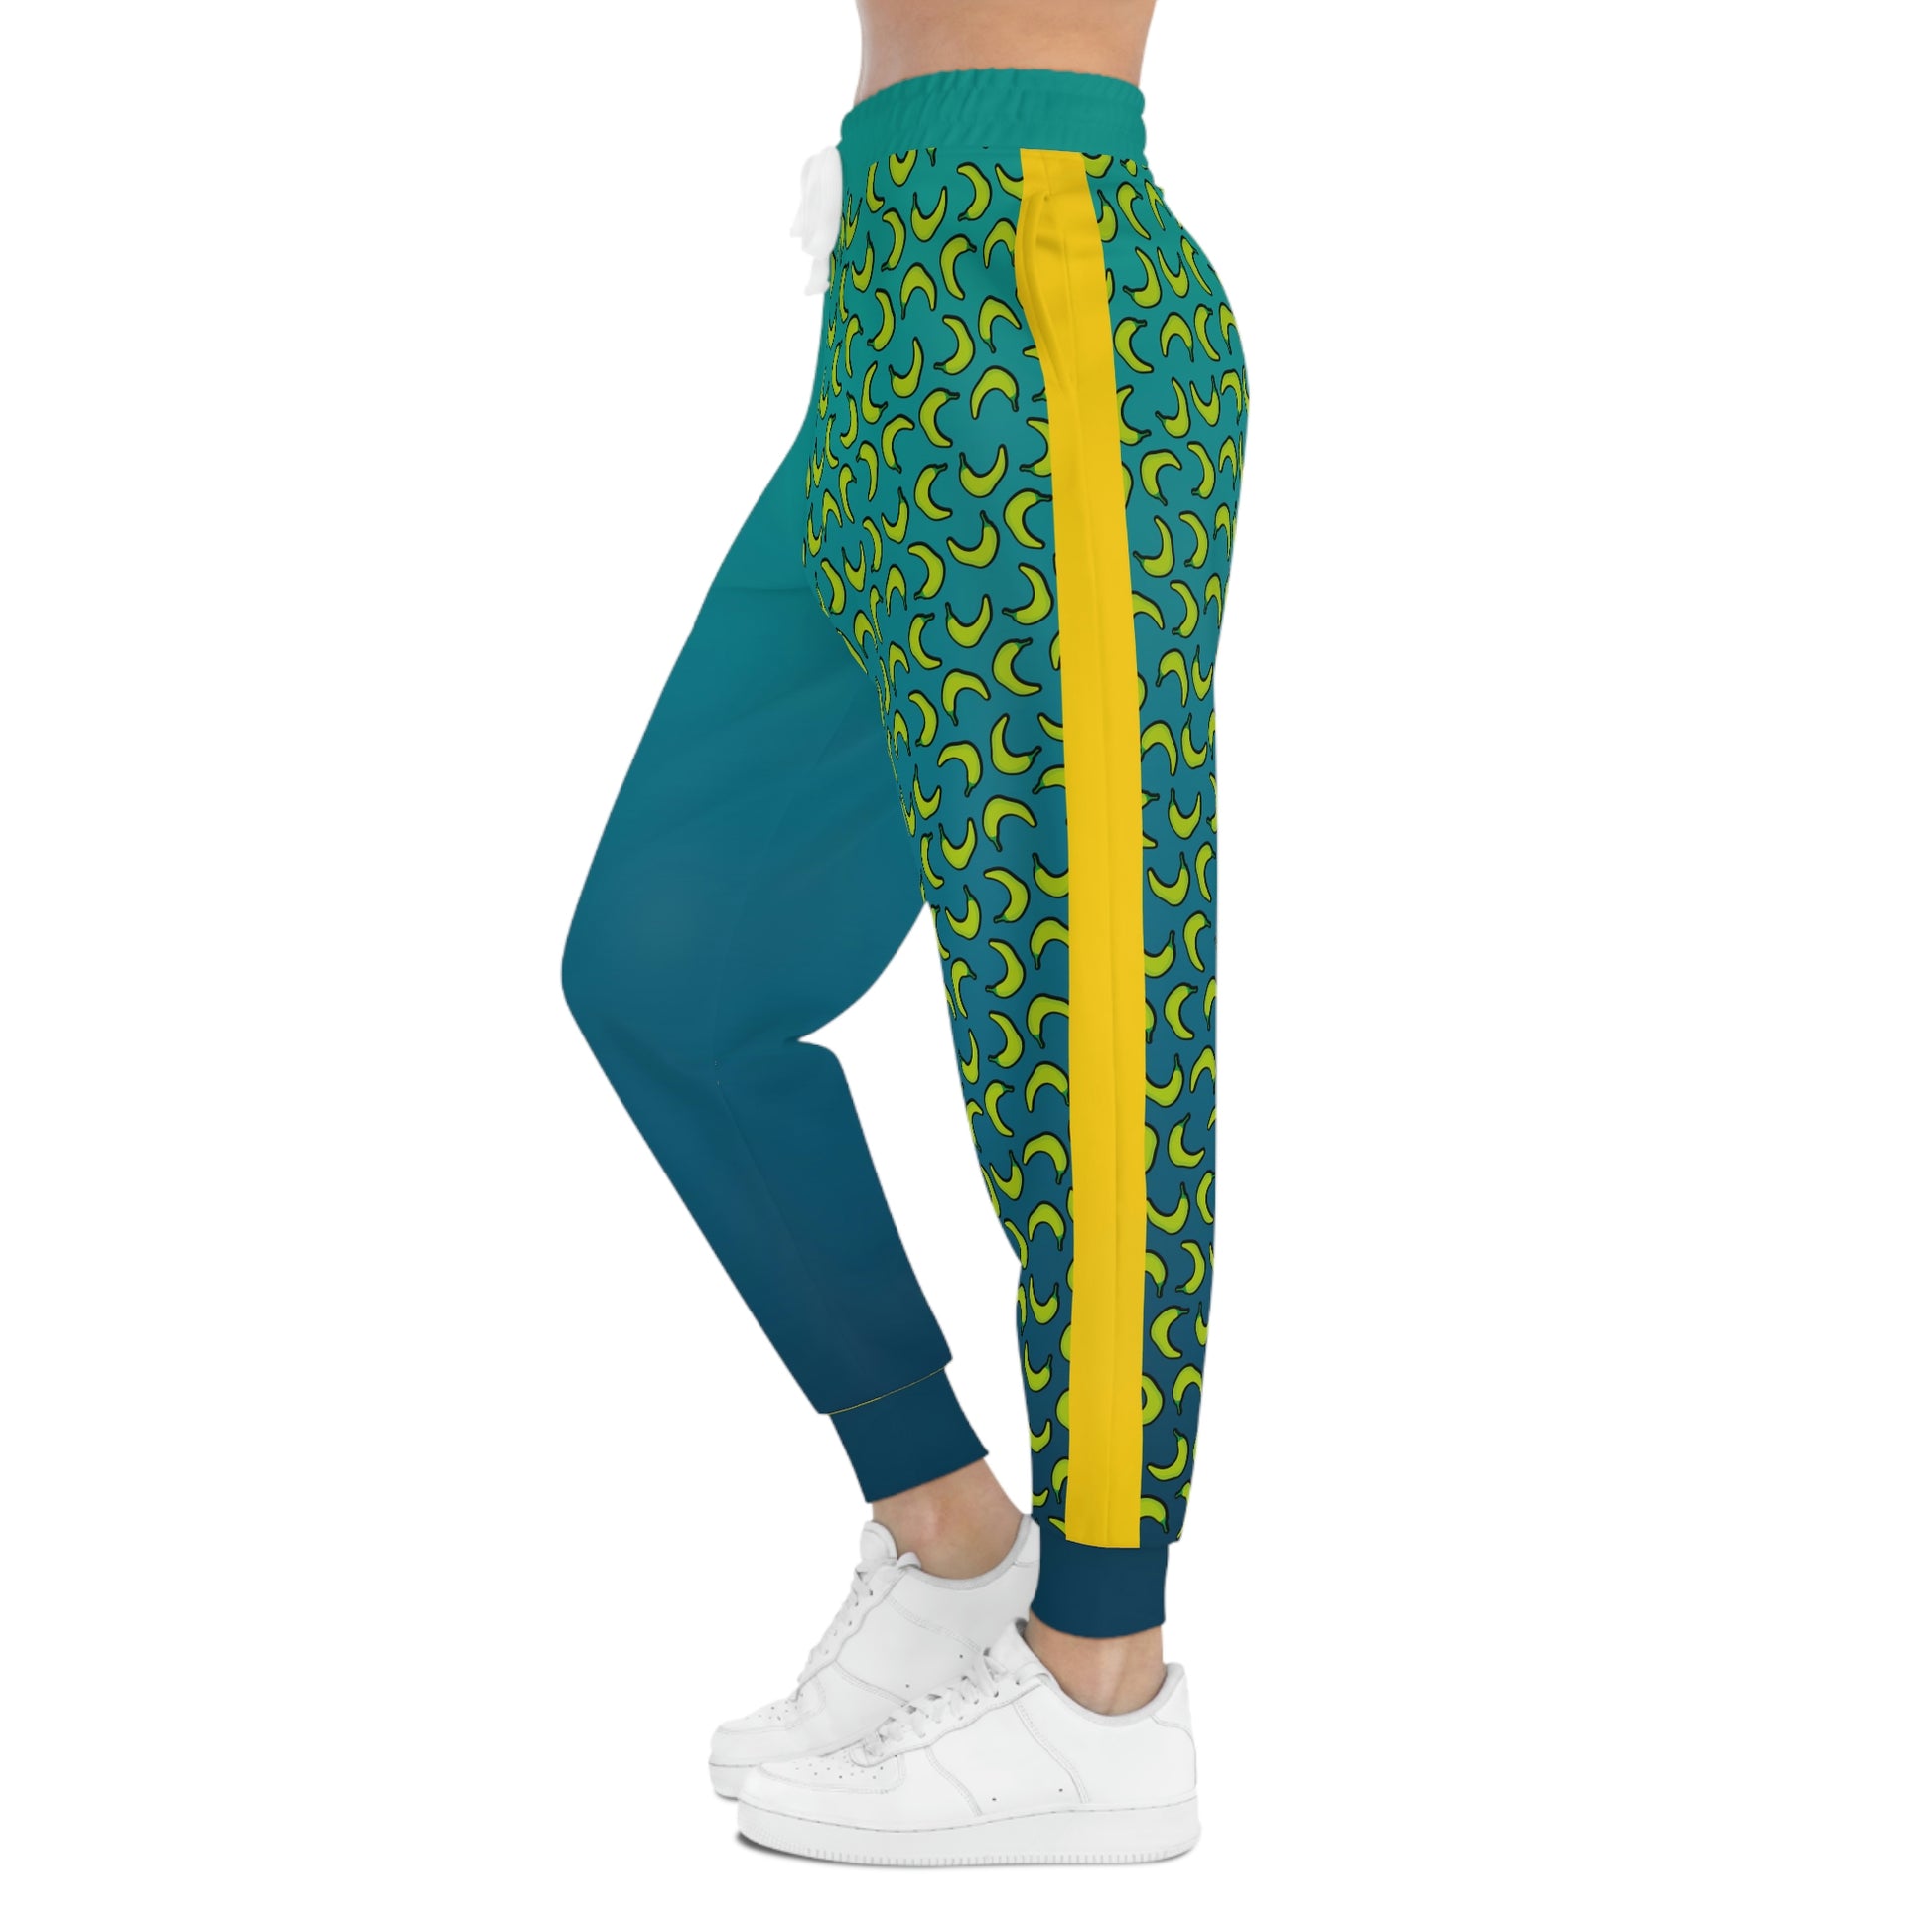 Athletic Joggers for women who consider themselves HOT! – PROUD TO